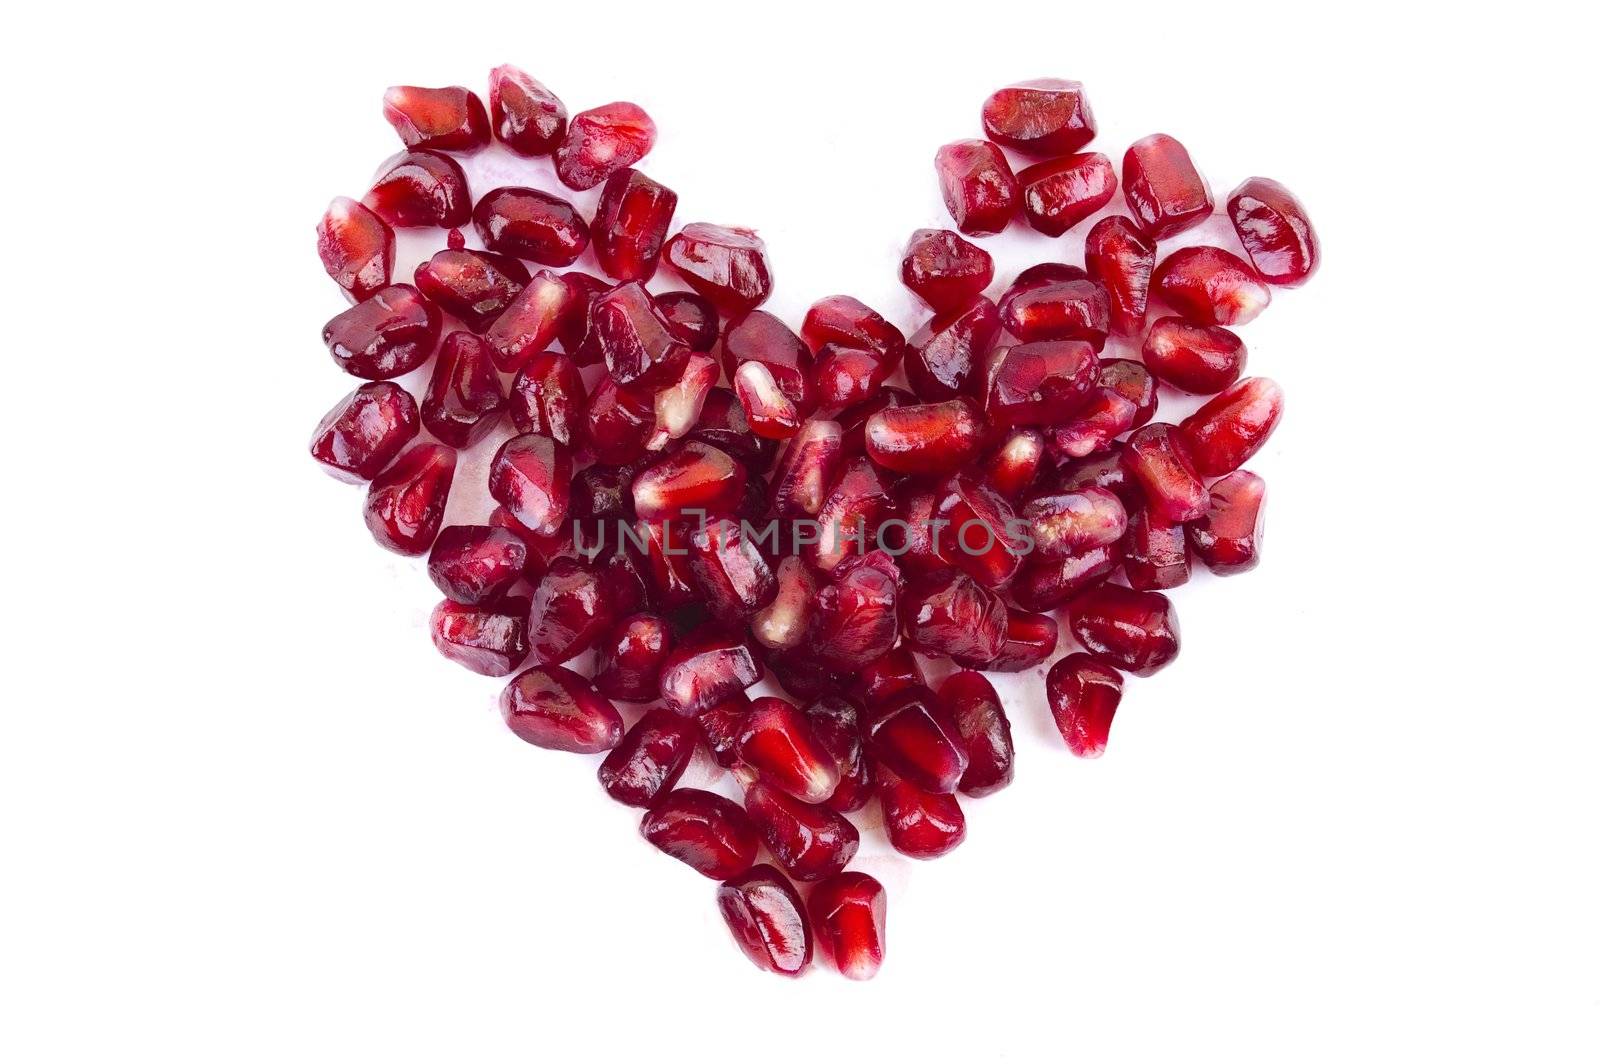 pomegranate seeds in heart shape isolated by Triphka